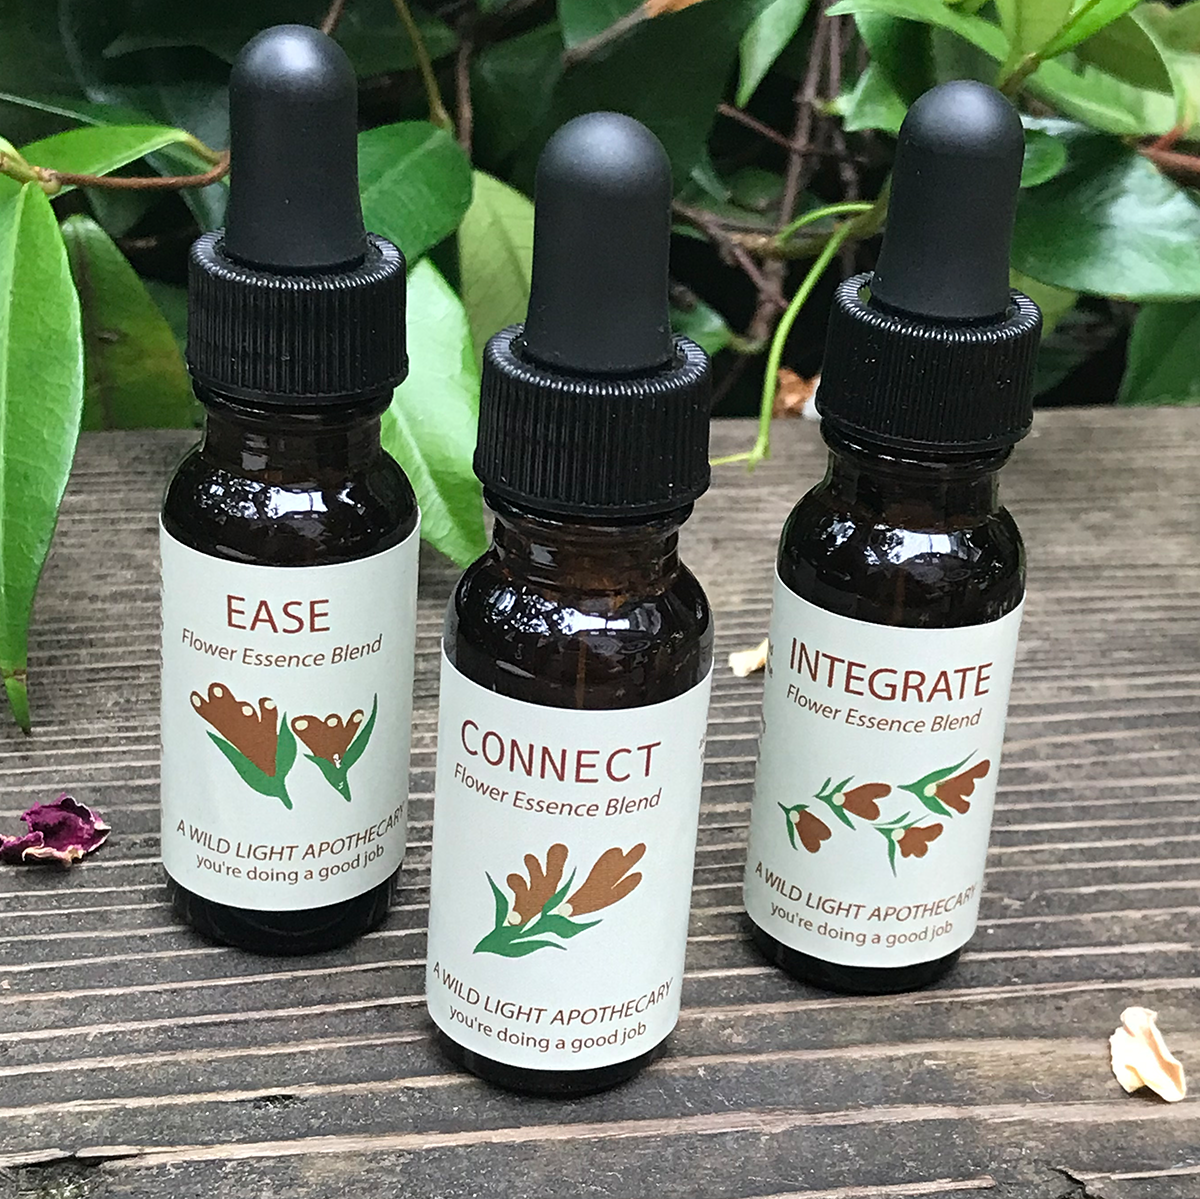 Flower Essences ease, connect, integrate Tinctures by a Wild Light Apothecary